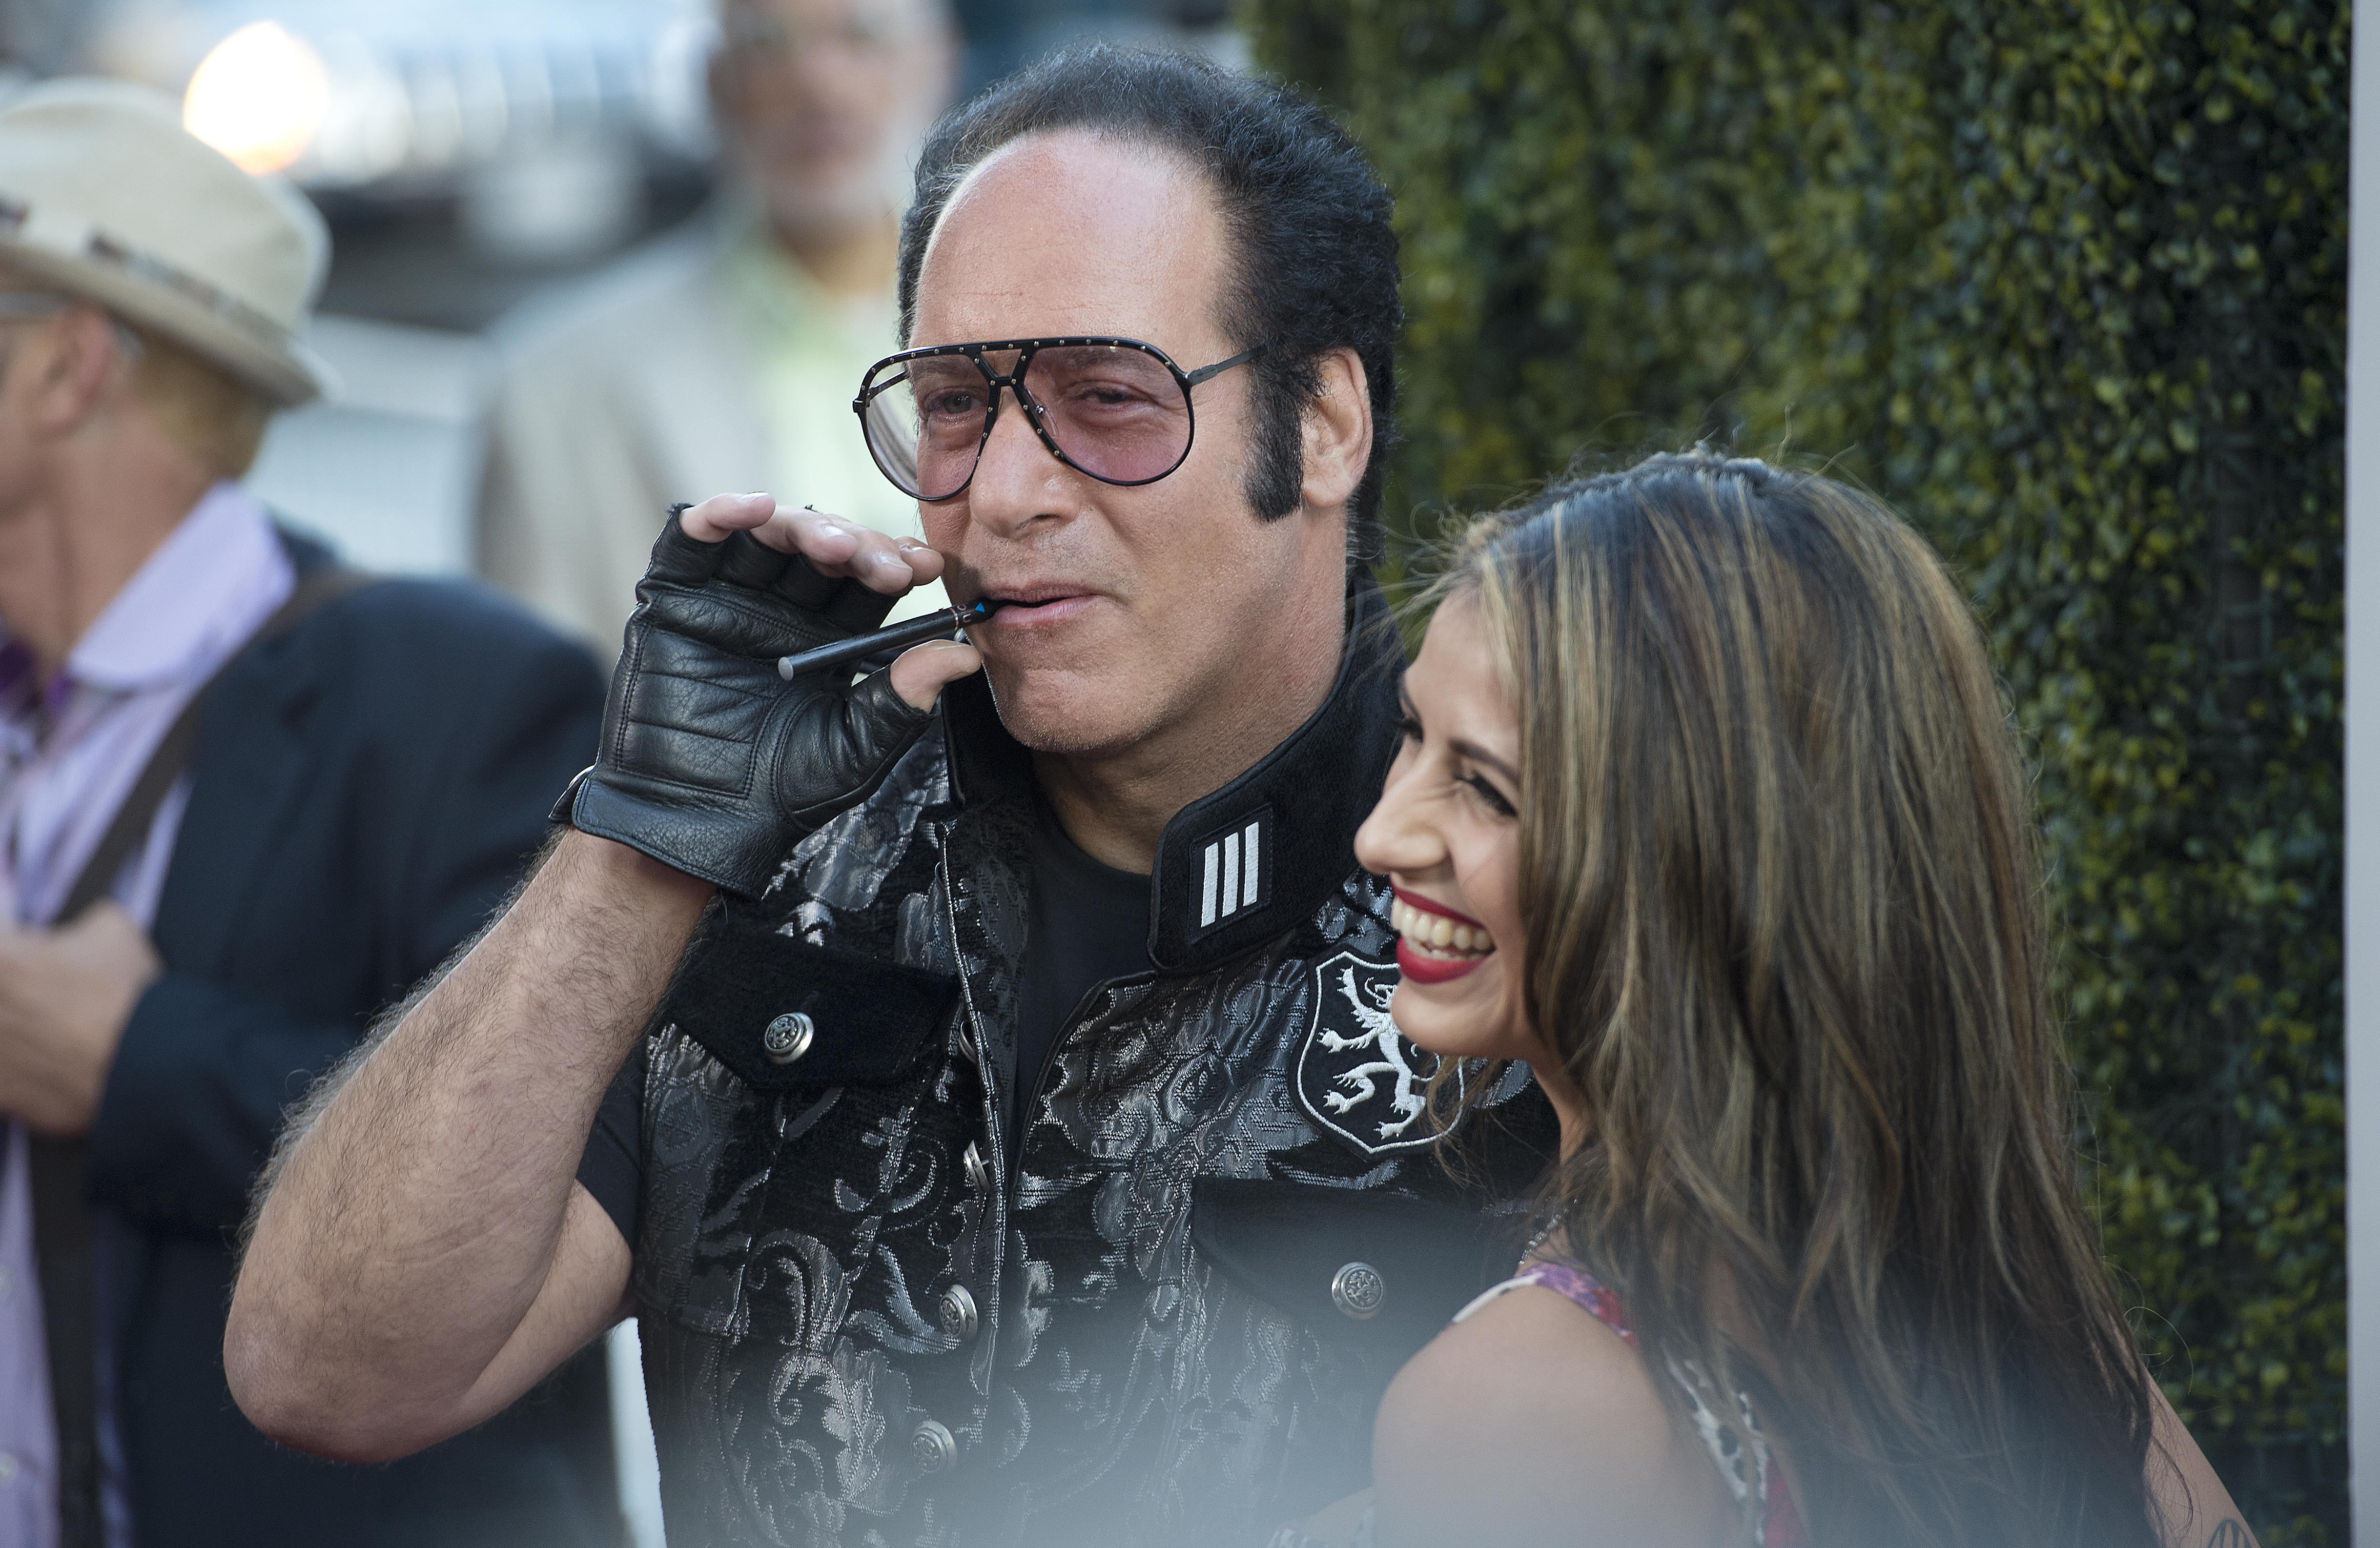 Cast member Andrew Dice Clay smokes an e-cigarette as he arrives with Valerie Vasquez for the premiere of the film "Blue Jasmine," at the Academy of Motion Picture Arts and Sciences (AMPAS) in Beverly Hills, California July 24, 2013. (Robyn Beck / AFP / Getty Images)